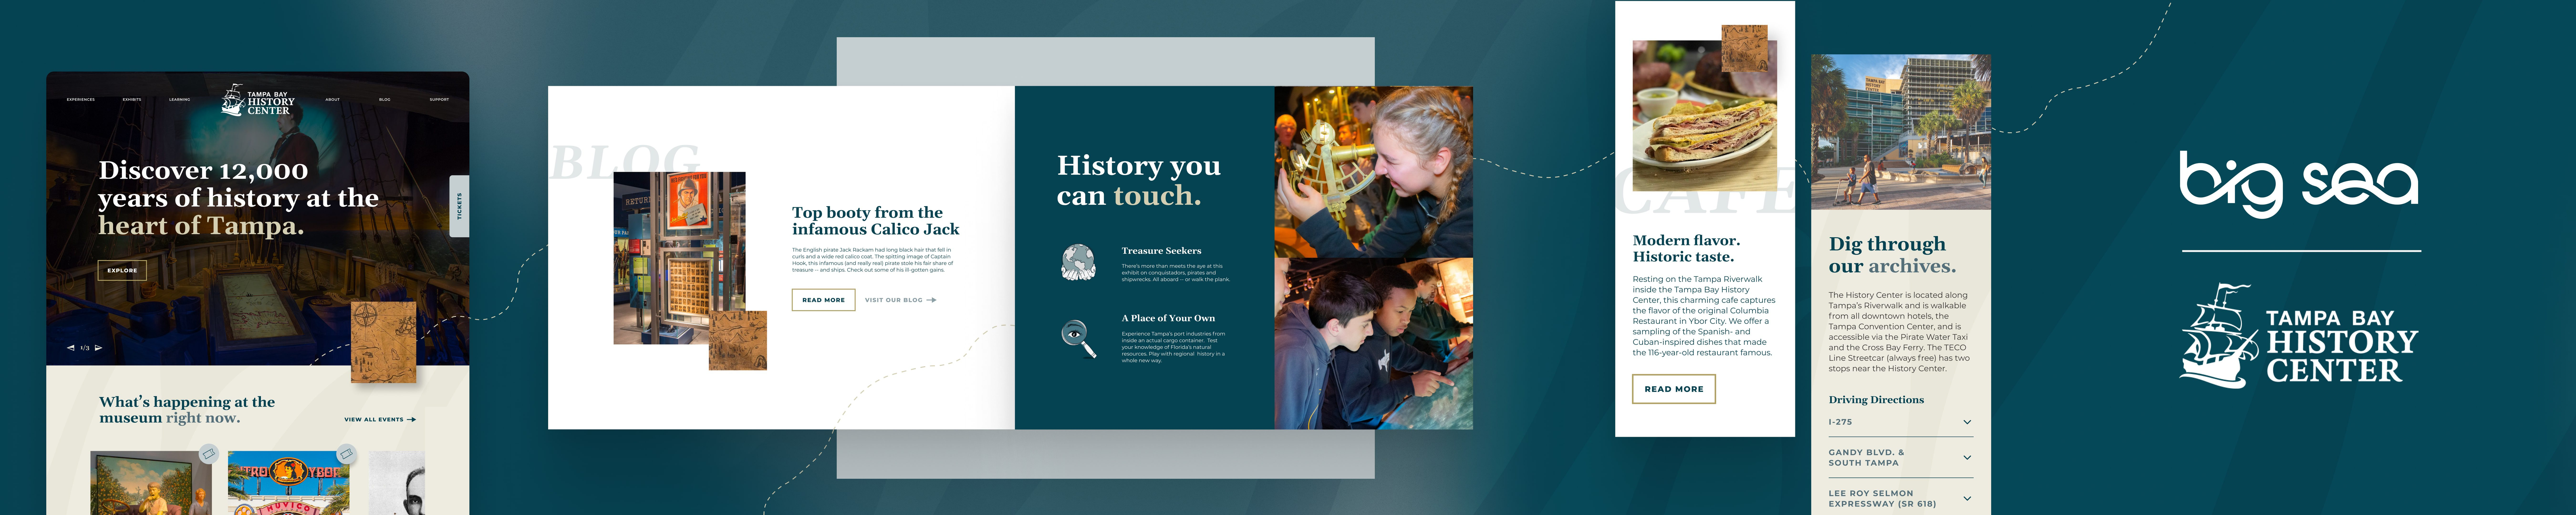 Tampa Bay History Center Museum Website snapshots from launch